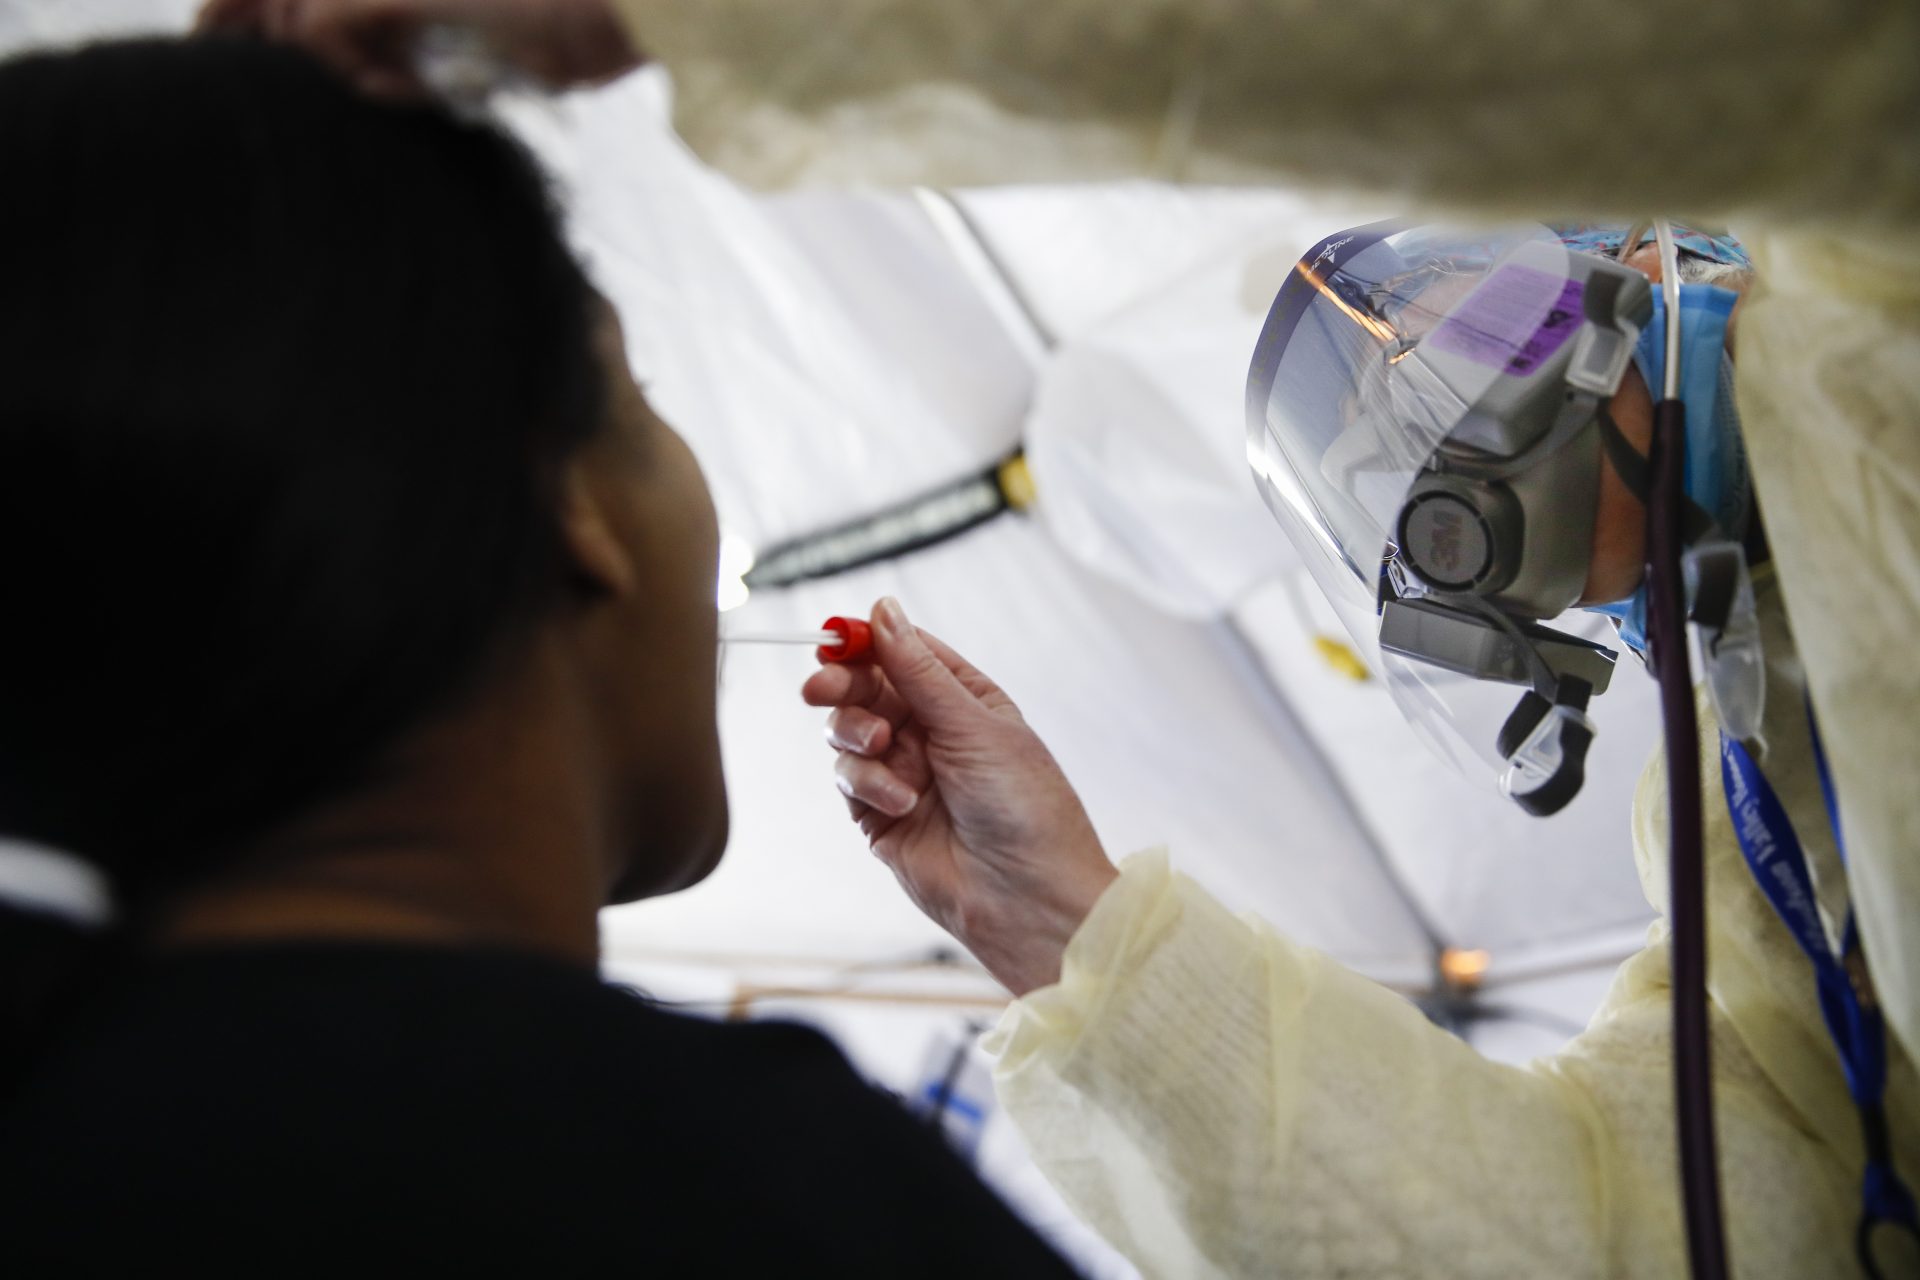 In this April 20, 2020 photo, Catherine Hopkins, Director of Community Outreach and School Health at St. Joseph's Hospital, right, performs a test on a patient in a COVID-19 triage tent at St. Joseph's Hospital in Yonkers, N.Y. New York’s plan for taming the coronavirus hinges on taking a time-tested practice to an extraordinary level: hiring an “army” of people to try to trace everyone who might be infected. It's part of a common approach to controlling infectious diseases -- testing, tracing contacts and isolating those infected. But the scope is staggering even for a public health system that used the technique to combat AIDS and tuberculosis.